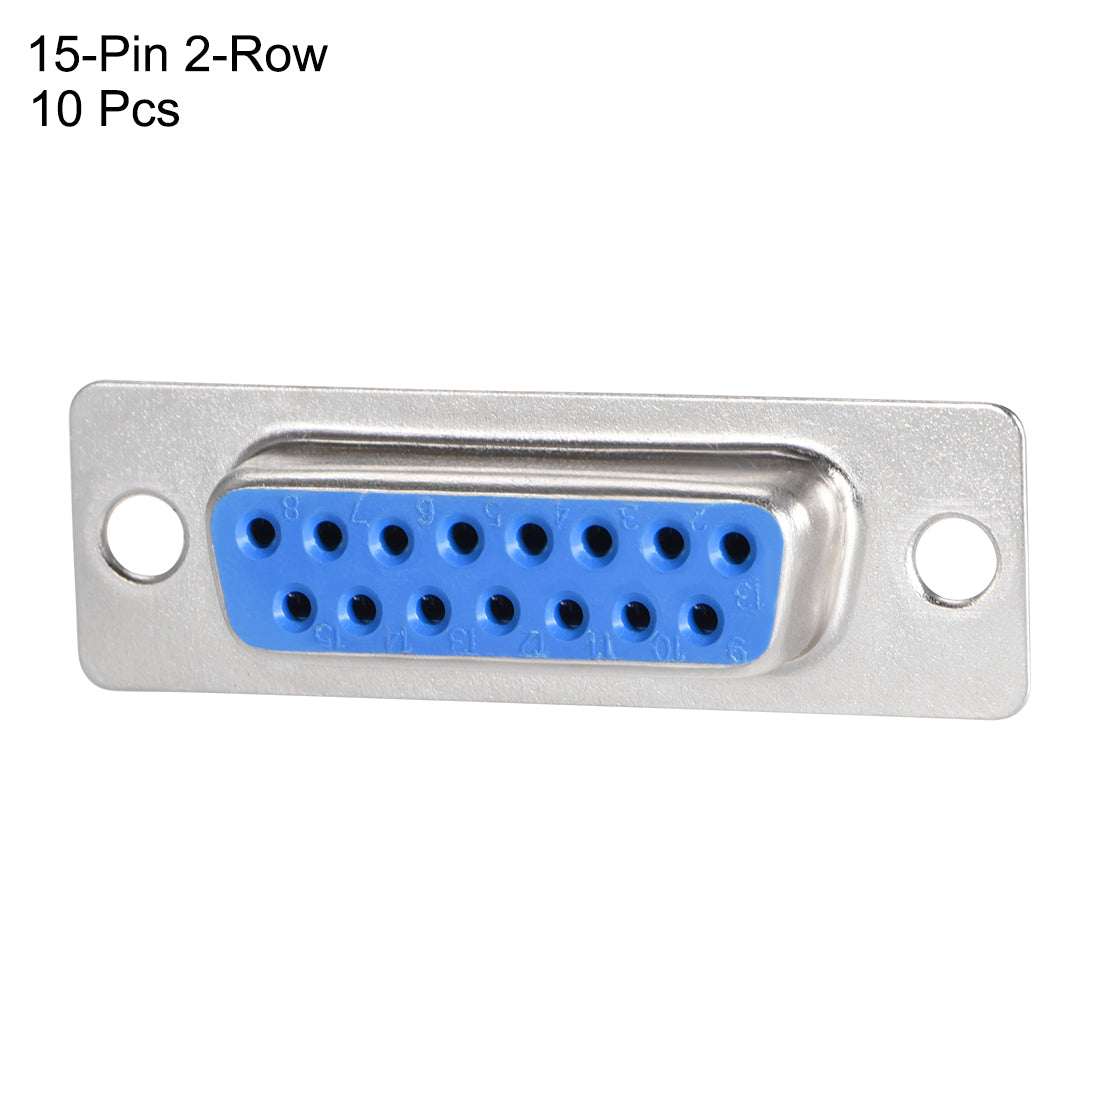 uxcell Uxcell D-sub Connector DB15 Female Socket 15-pin 2-row Port Terminal Breakout for Mechanical Equipment CNC Computers Blue 10pcs